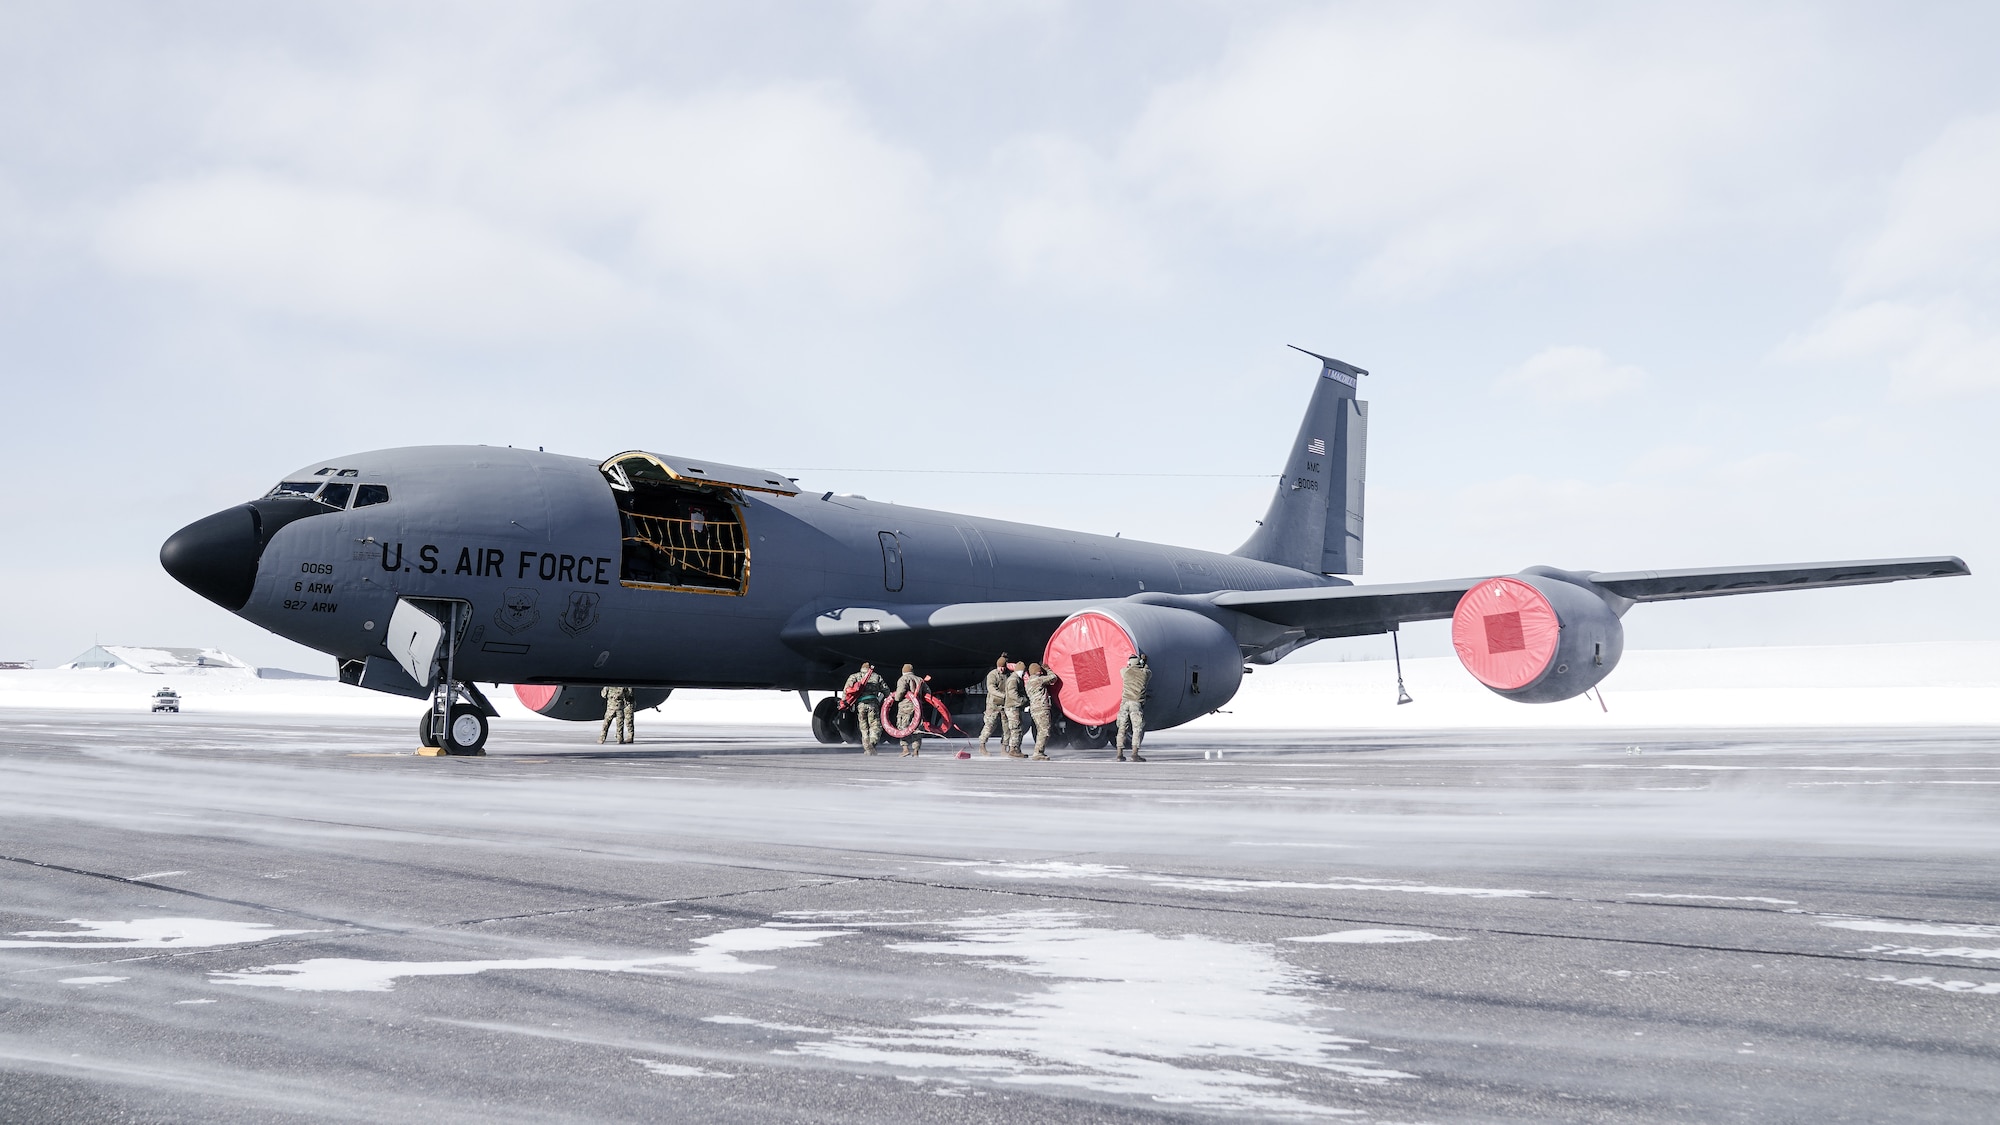 Maintainers assigned to the 6th Maintenance Group place engine covers on a KC-135 Stratotanker aircraft assigned to the 6th Air Refueling Wing after landing on the flight line during North American Aerospace Defense Command's (NORAD) Operation Noble Defender (OND), March 15, 2022.